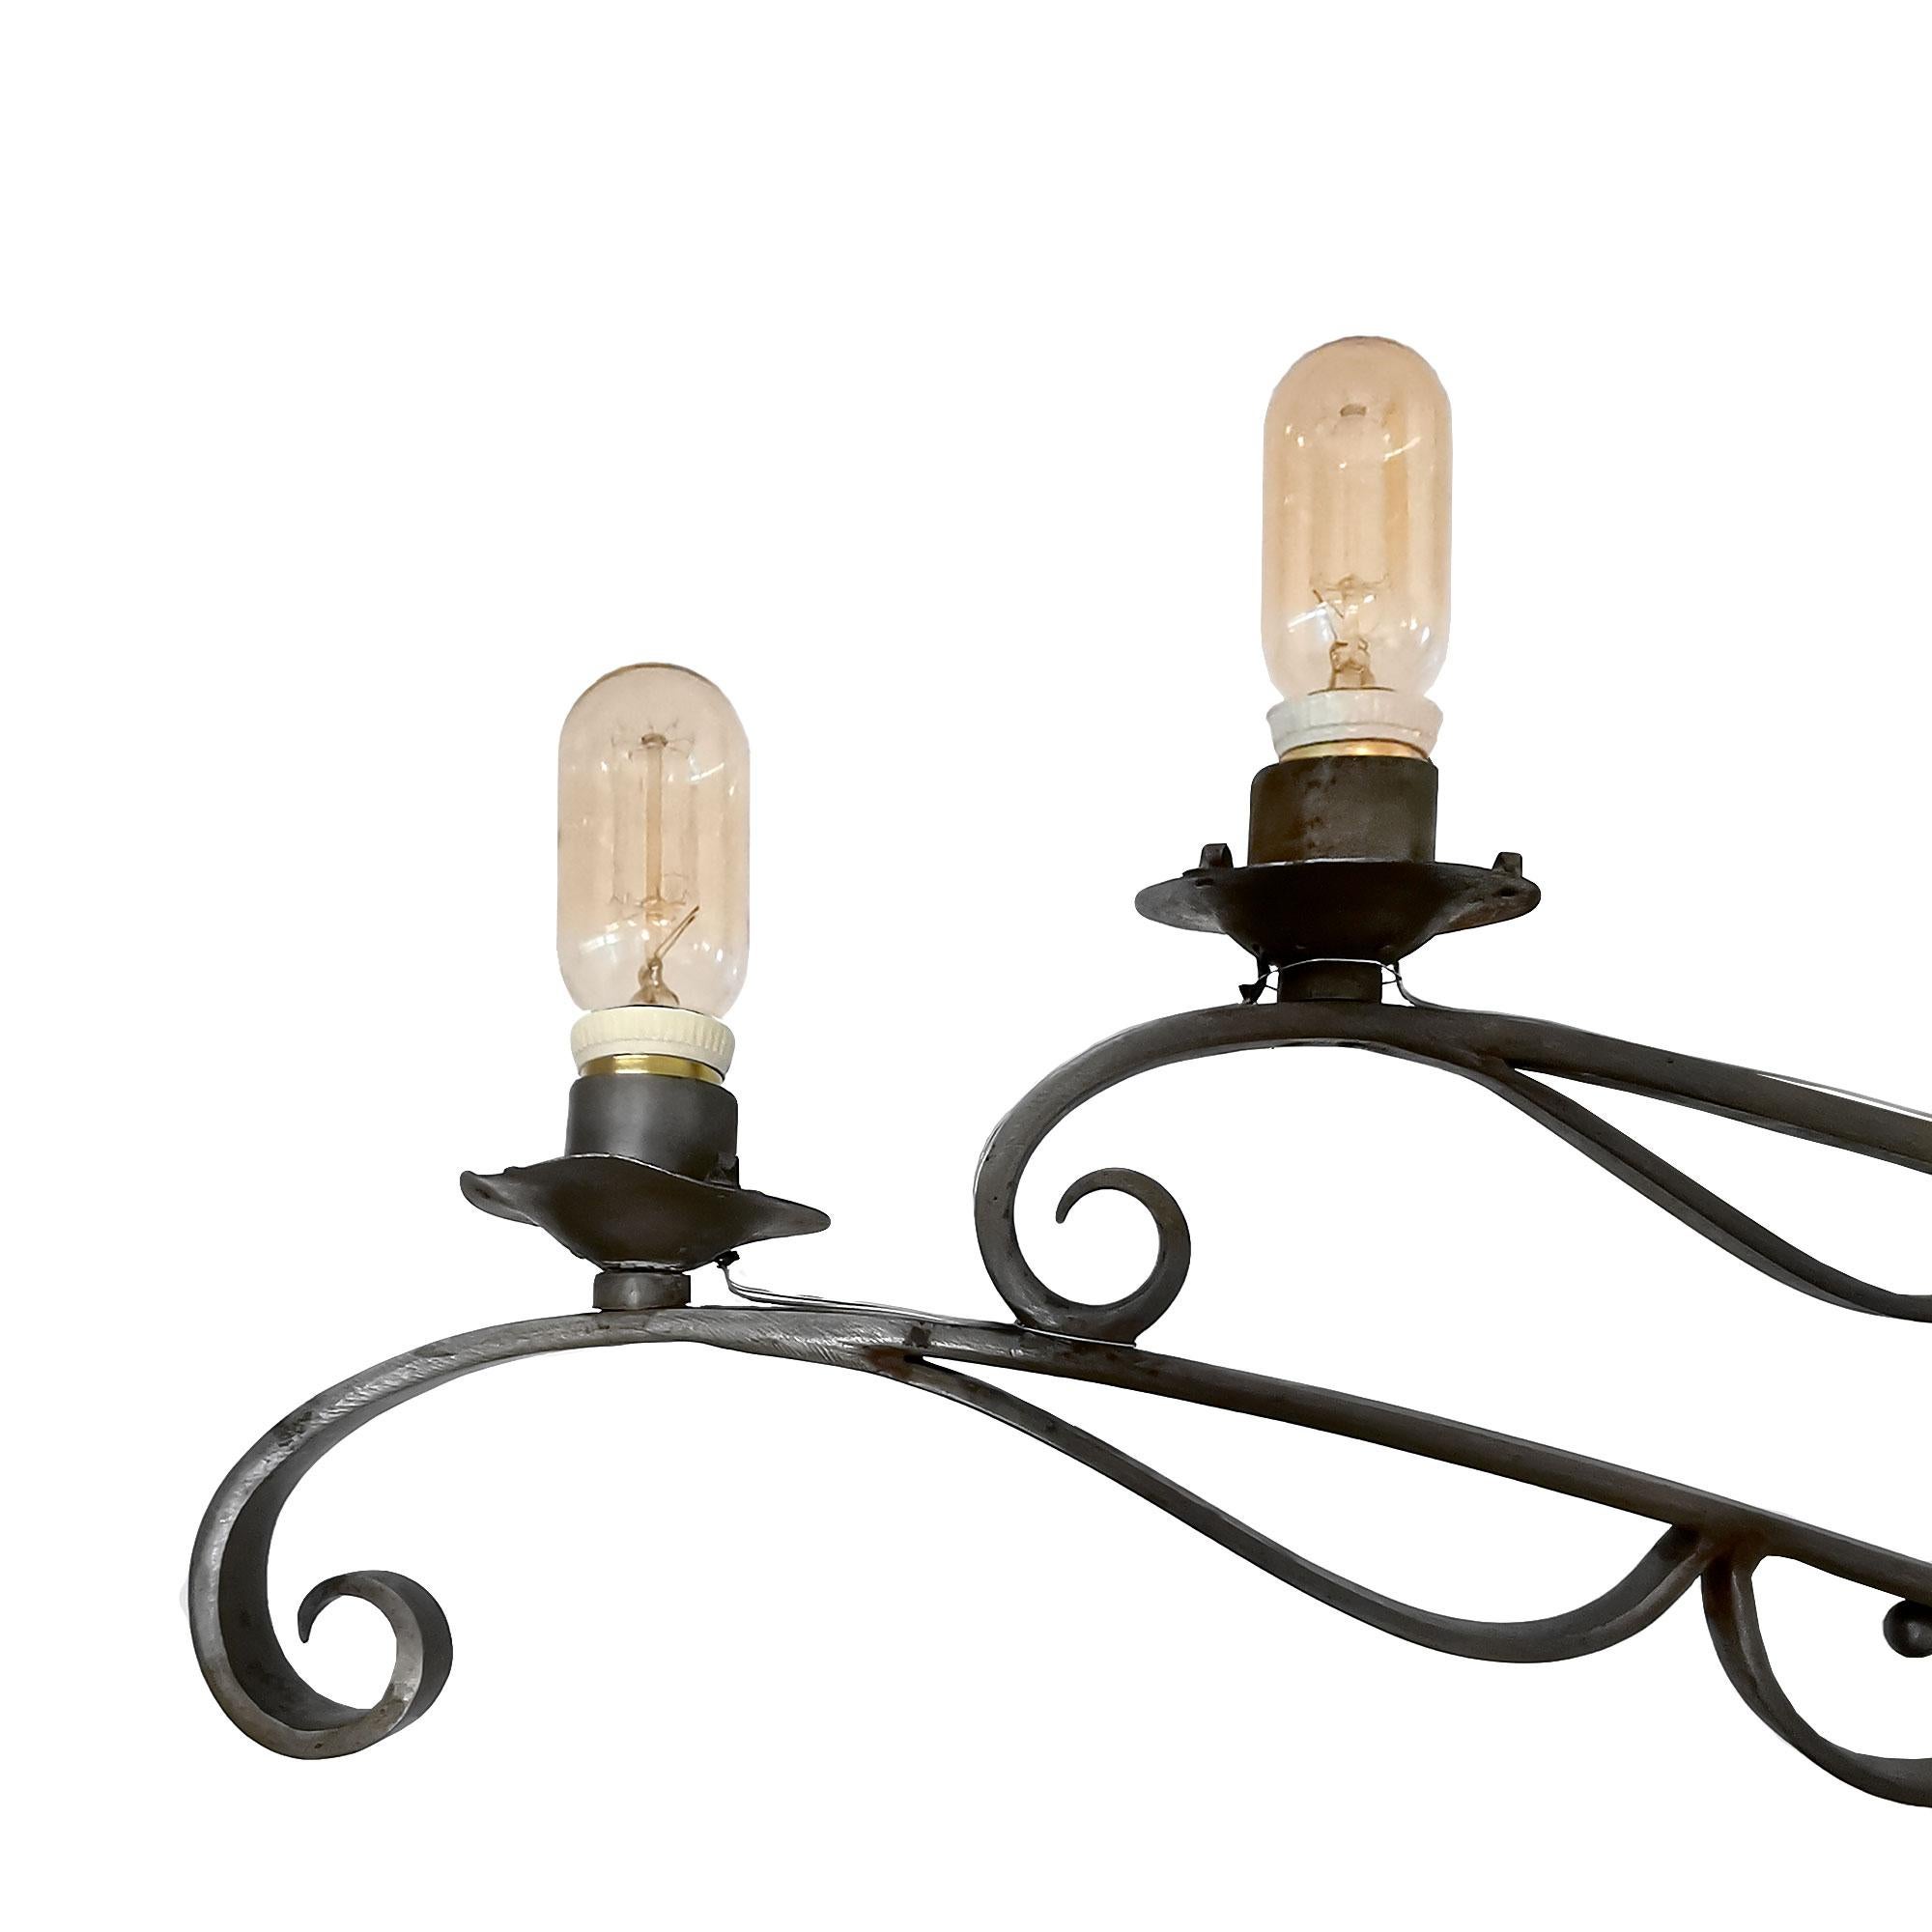 French 1890-1900 Large Ceiling Light in Wrought Iron, Oil Lamp, Electrified, France